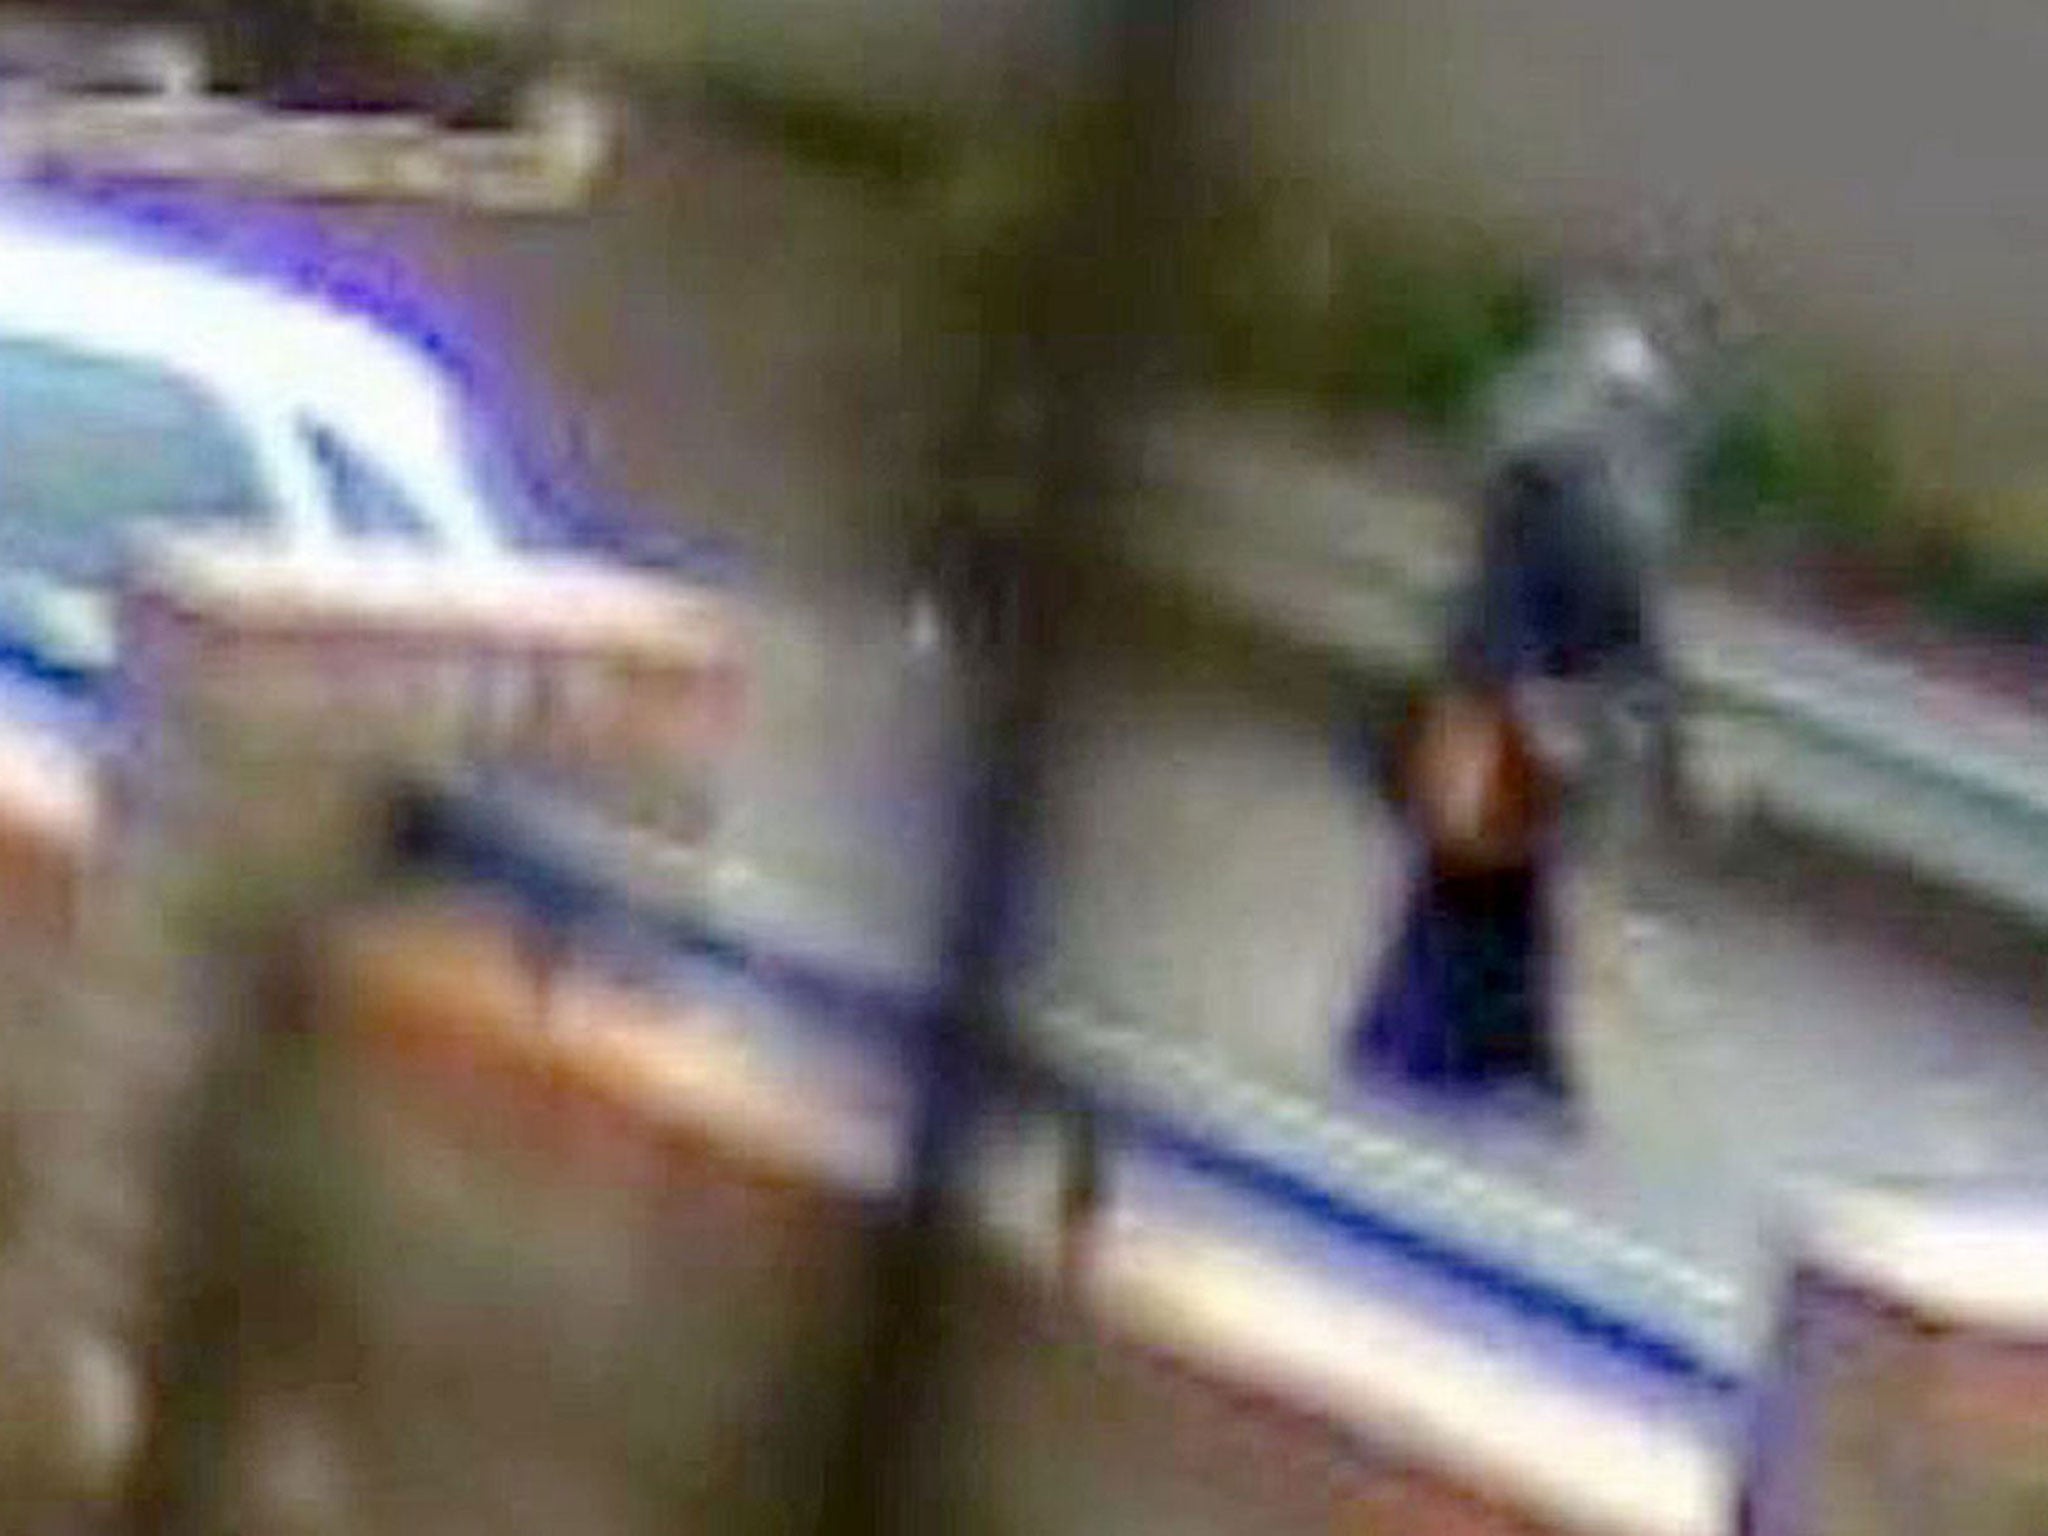 CCTV footage showing Almanea before the attack